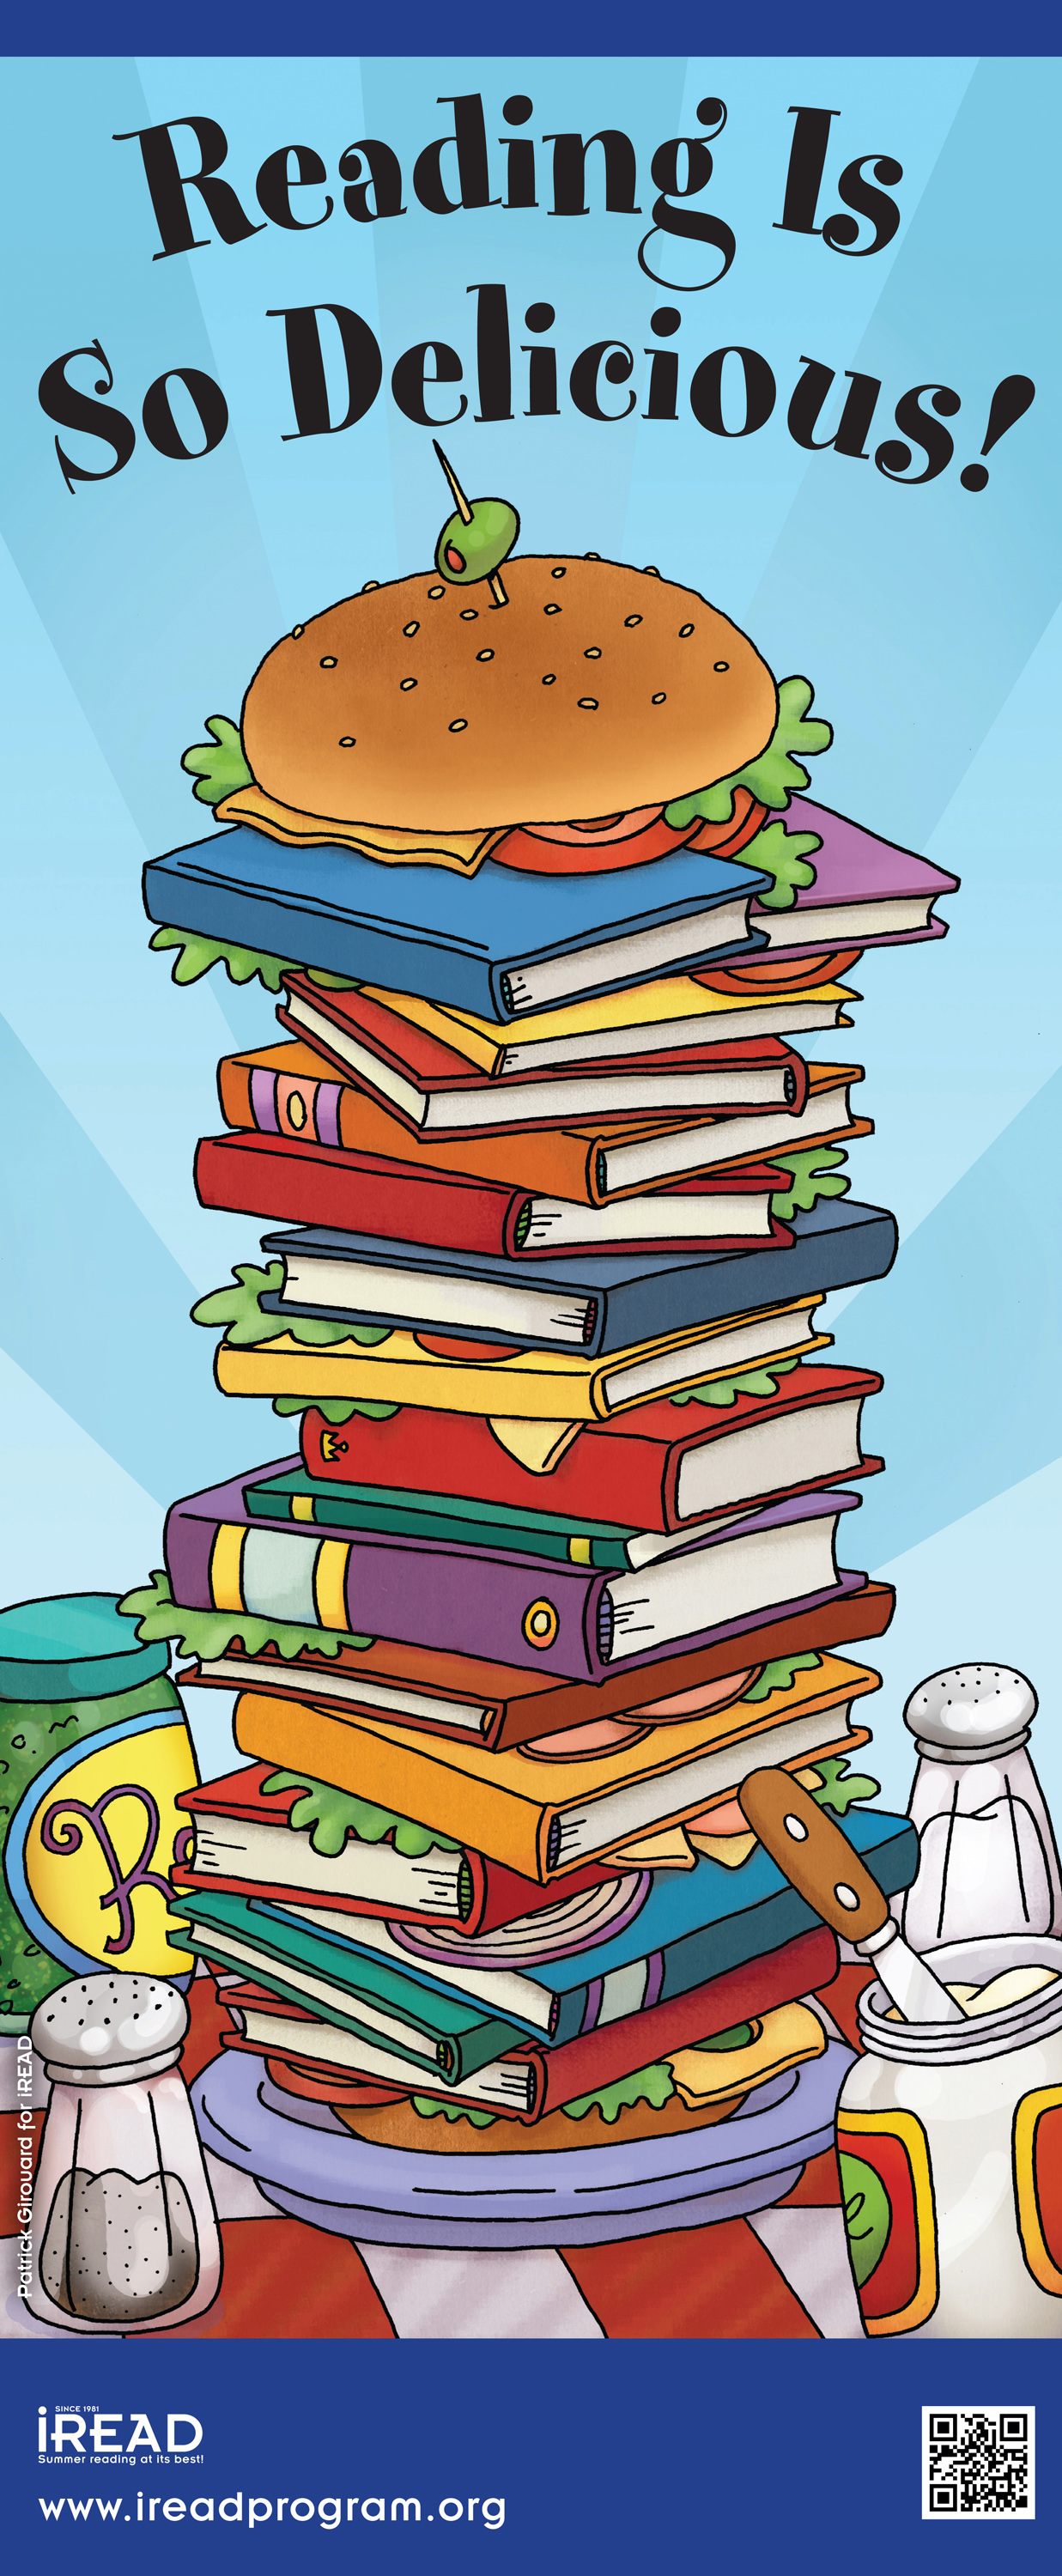 Winter Reading - Reading is So Delicious book sandwich